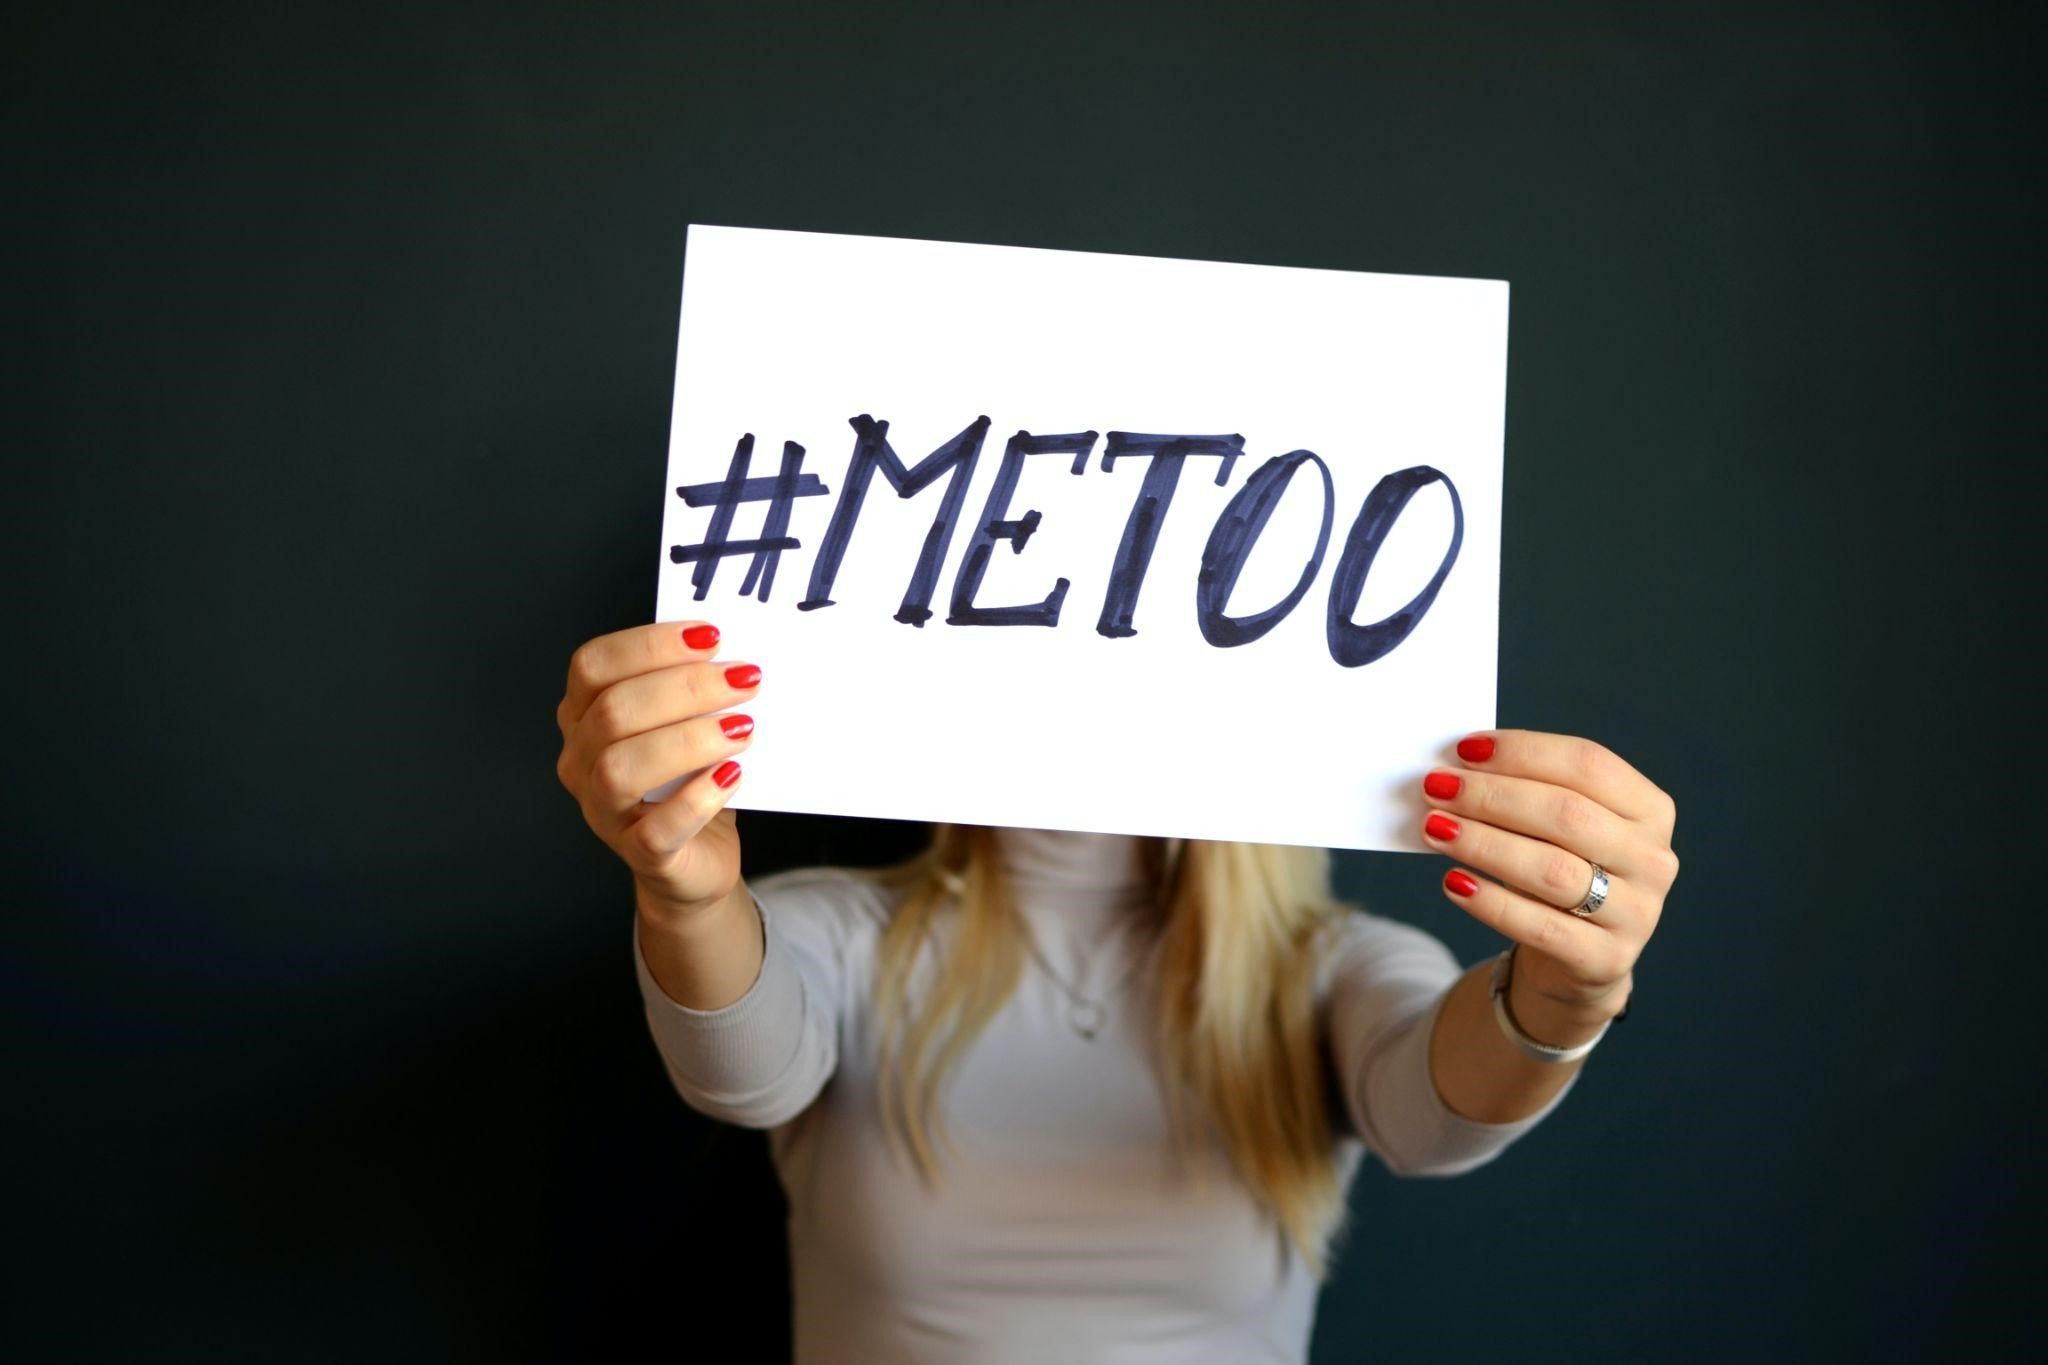 How Should Businesses Respond to Sexual Misconduct Allegations?